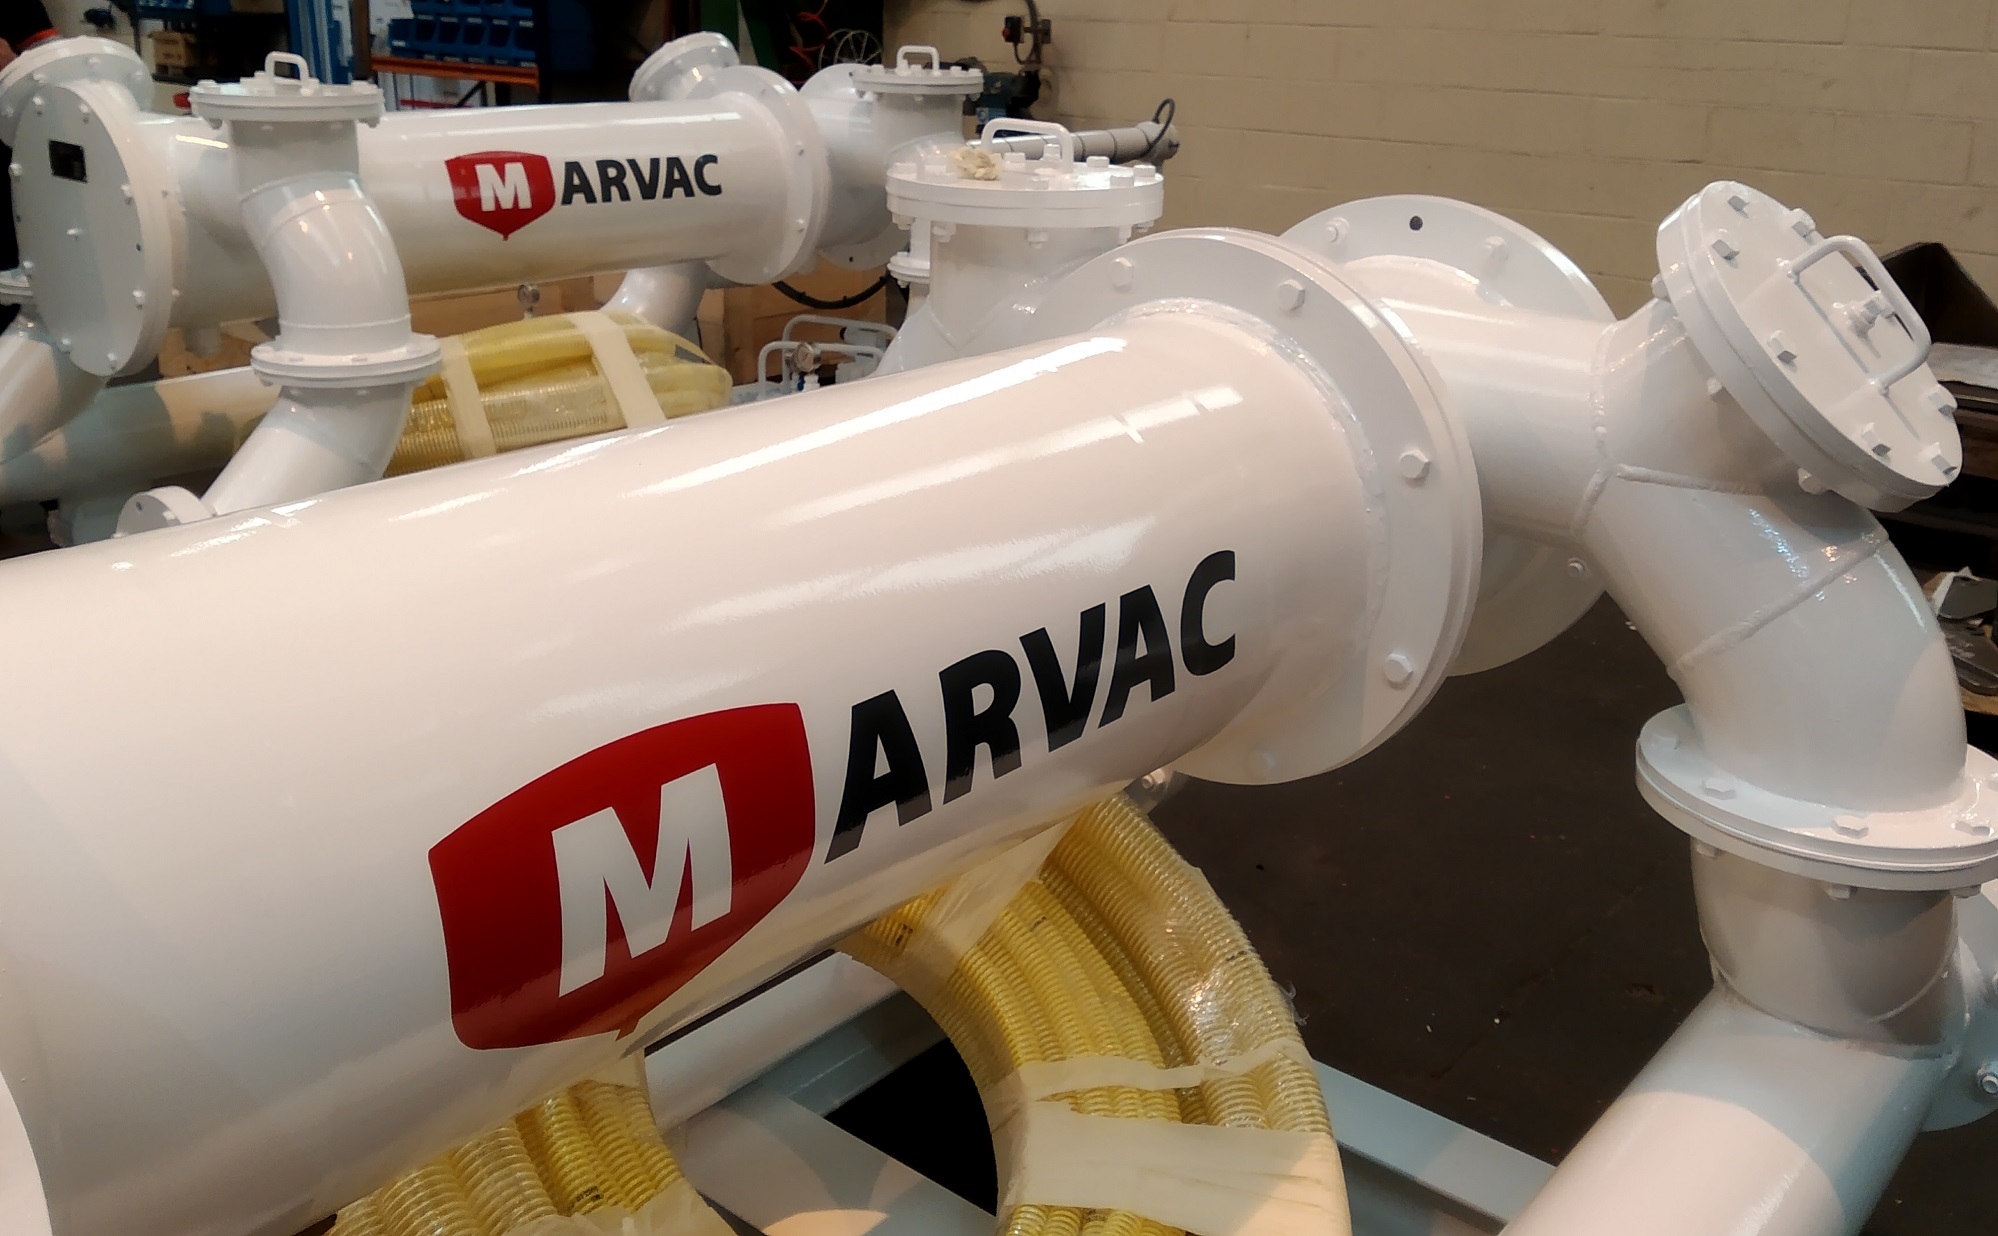 TH COMPANY to deliver 2 Marvac fish pumps to Manila (Philippines)